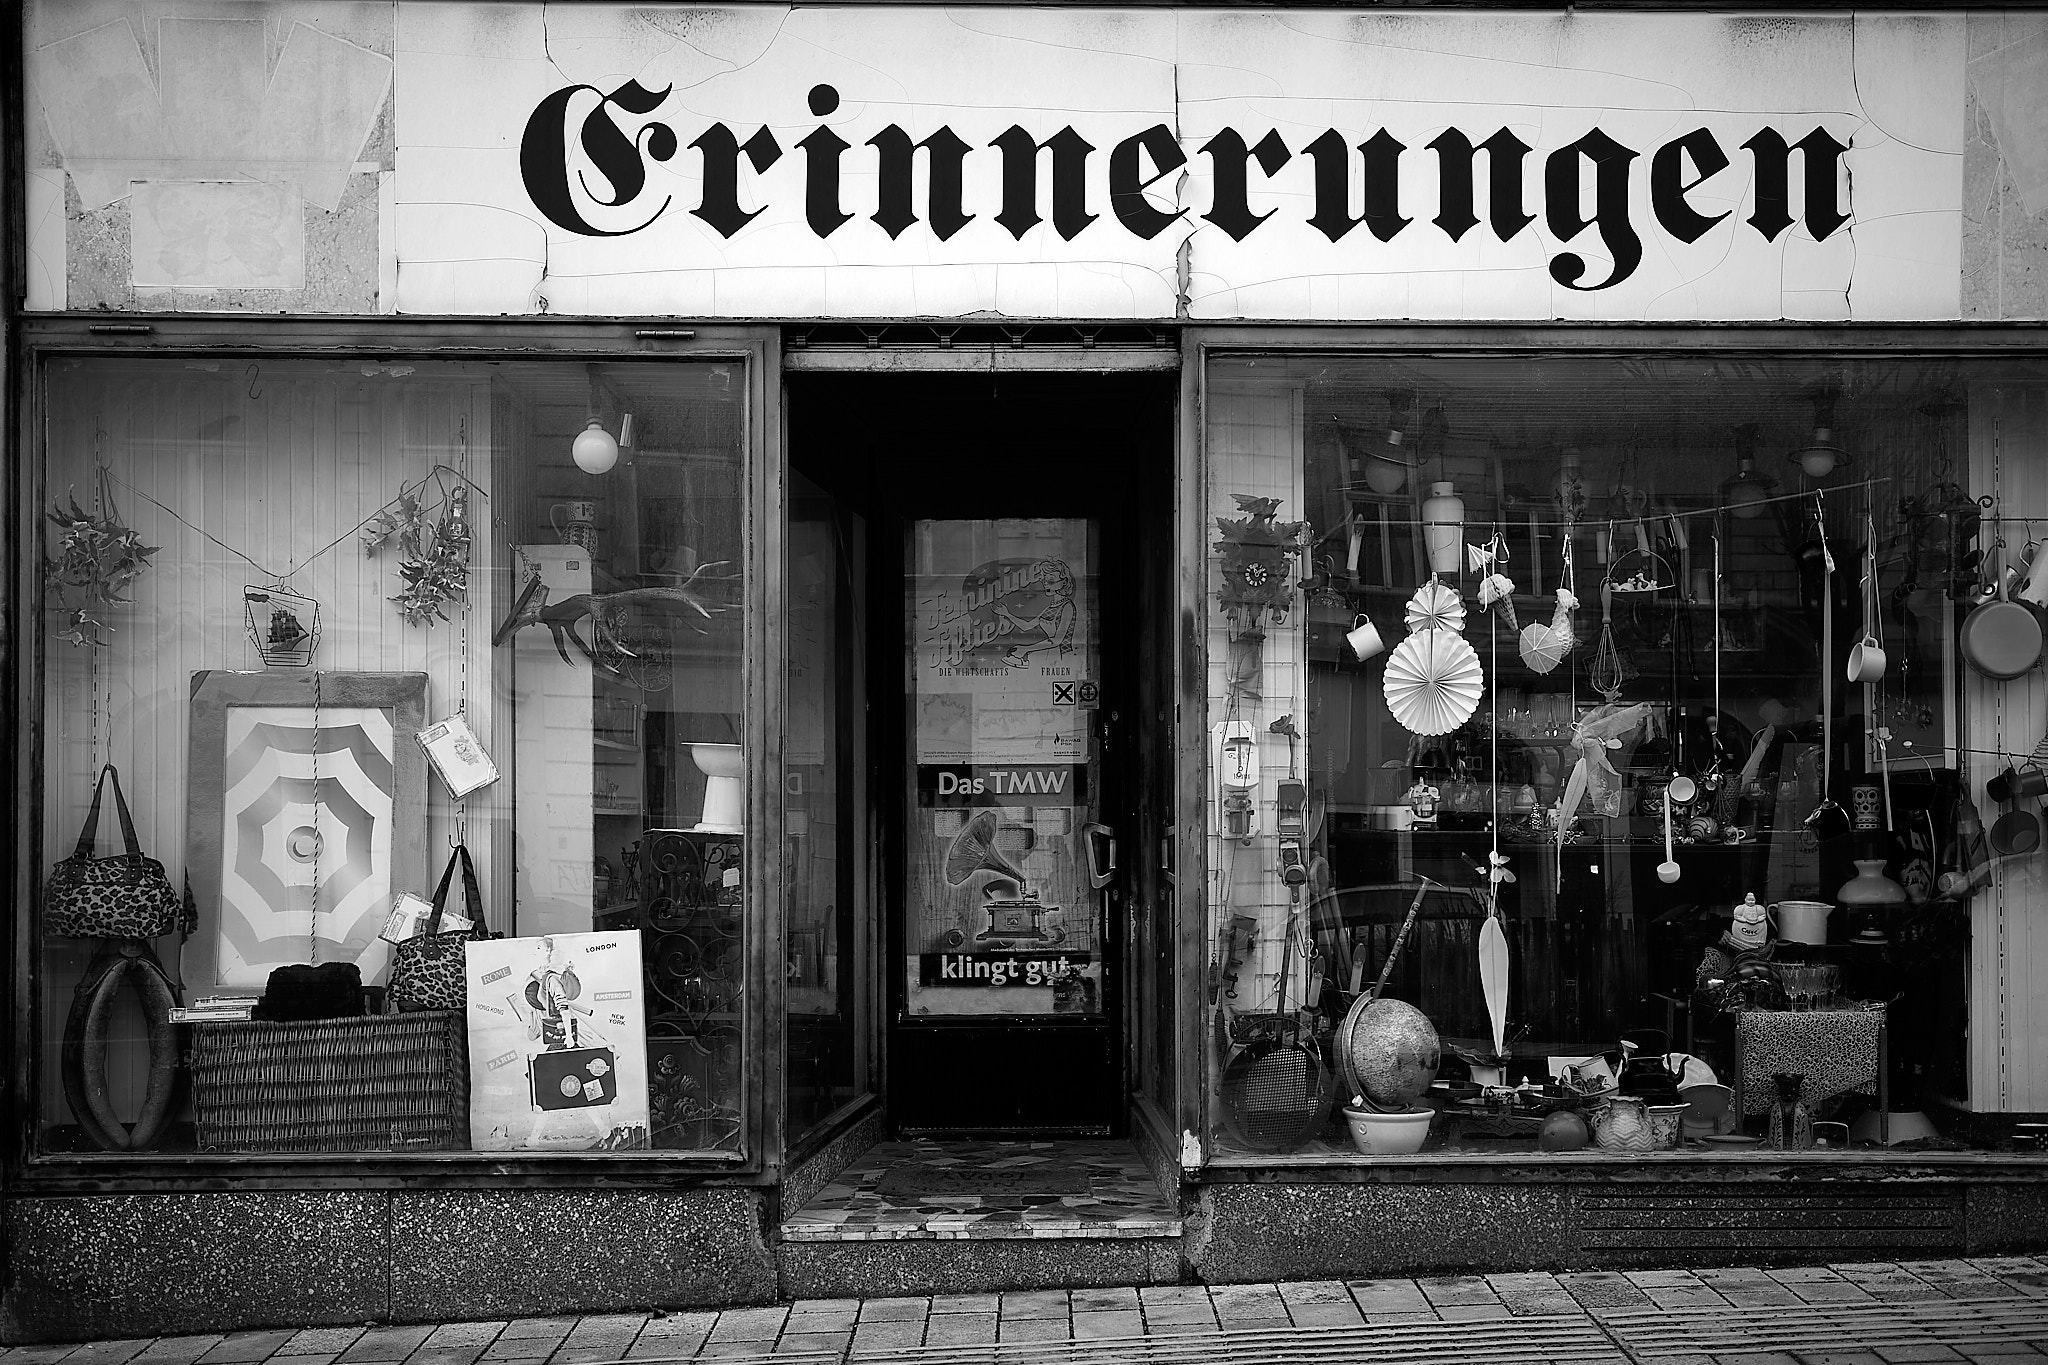 A black and white image of a quaint storefront with the word "Erinnerungen" on the sign above, suggesting a German-speaking location. The window displays various items including bags, sculptures, wall decorations, and small lighting fixtures. A reflection on the door shows the street opposite, hinting at an urban setting.